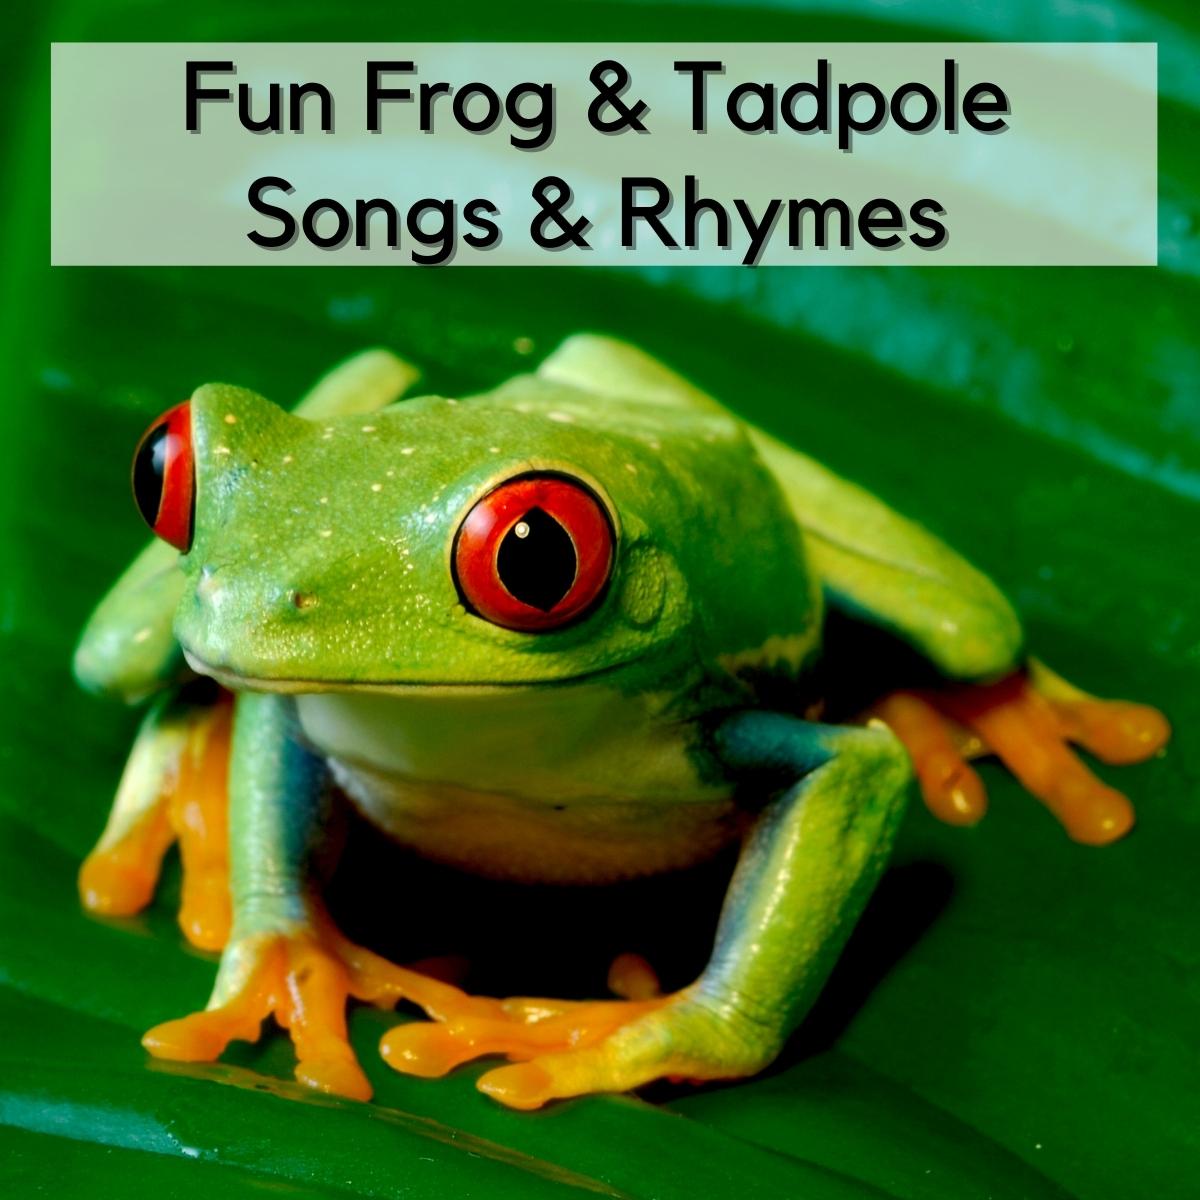 21 Fun Frog and Tadpoles Songs and Rhymes for Kids